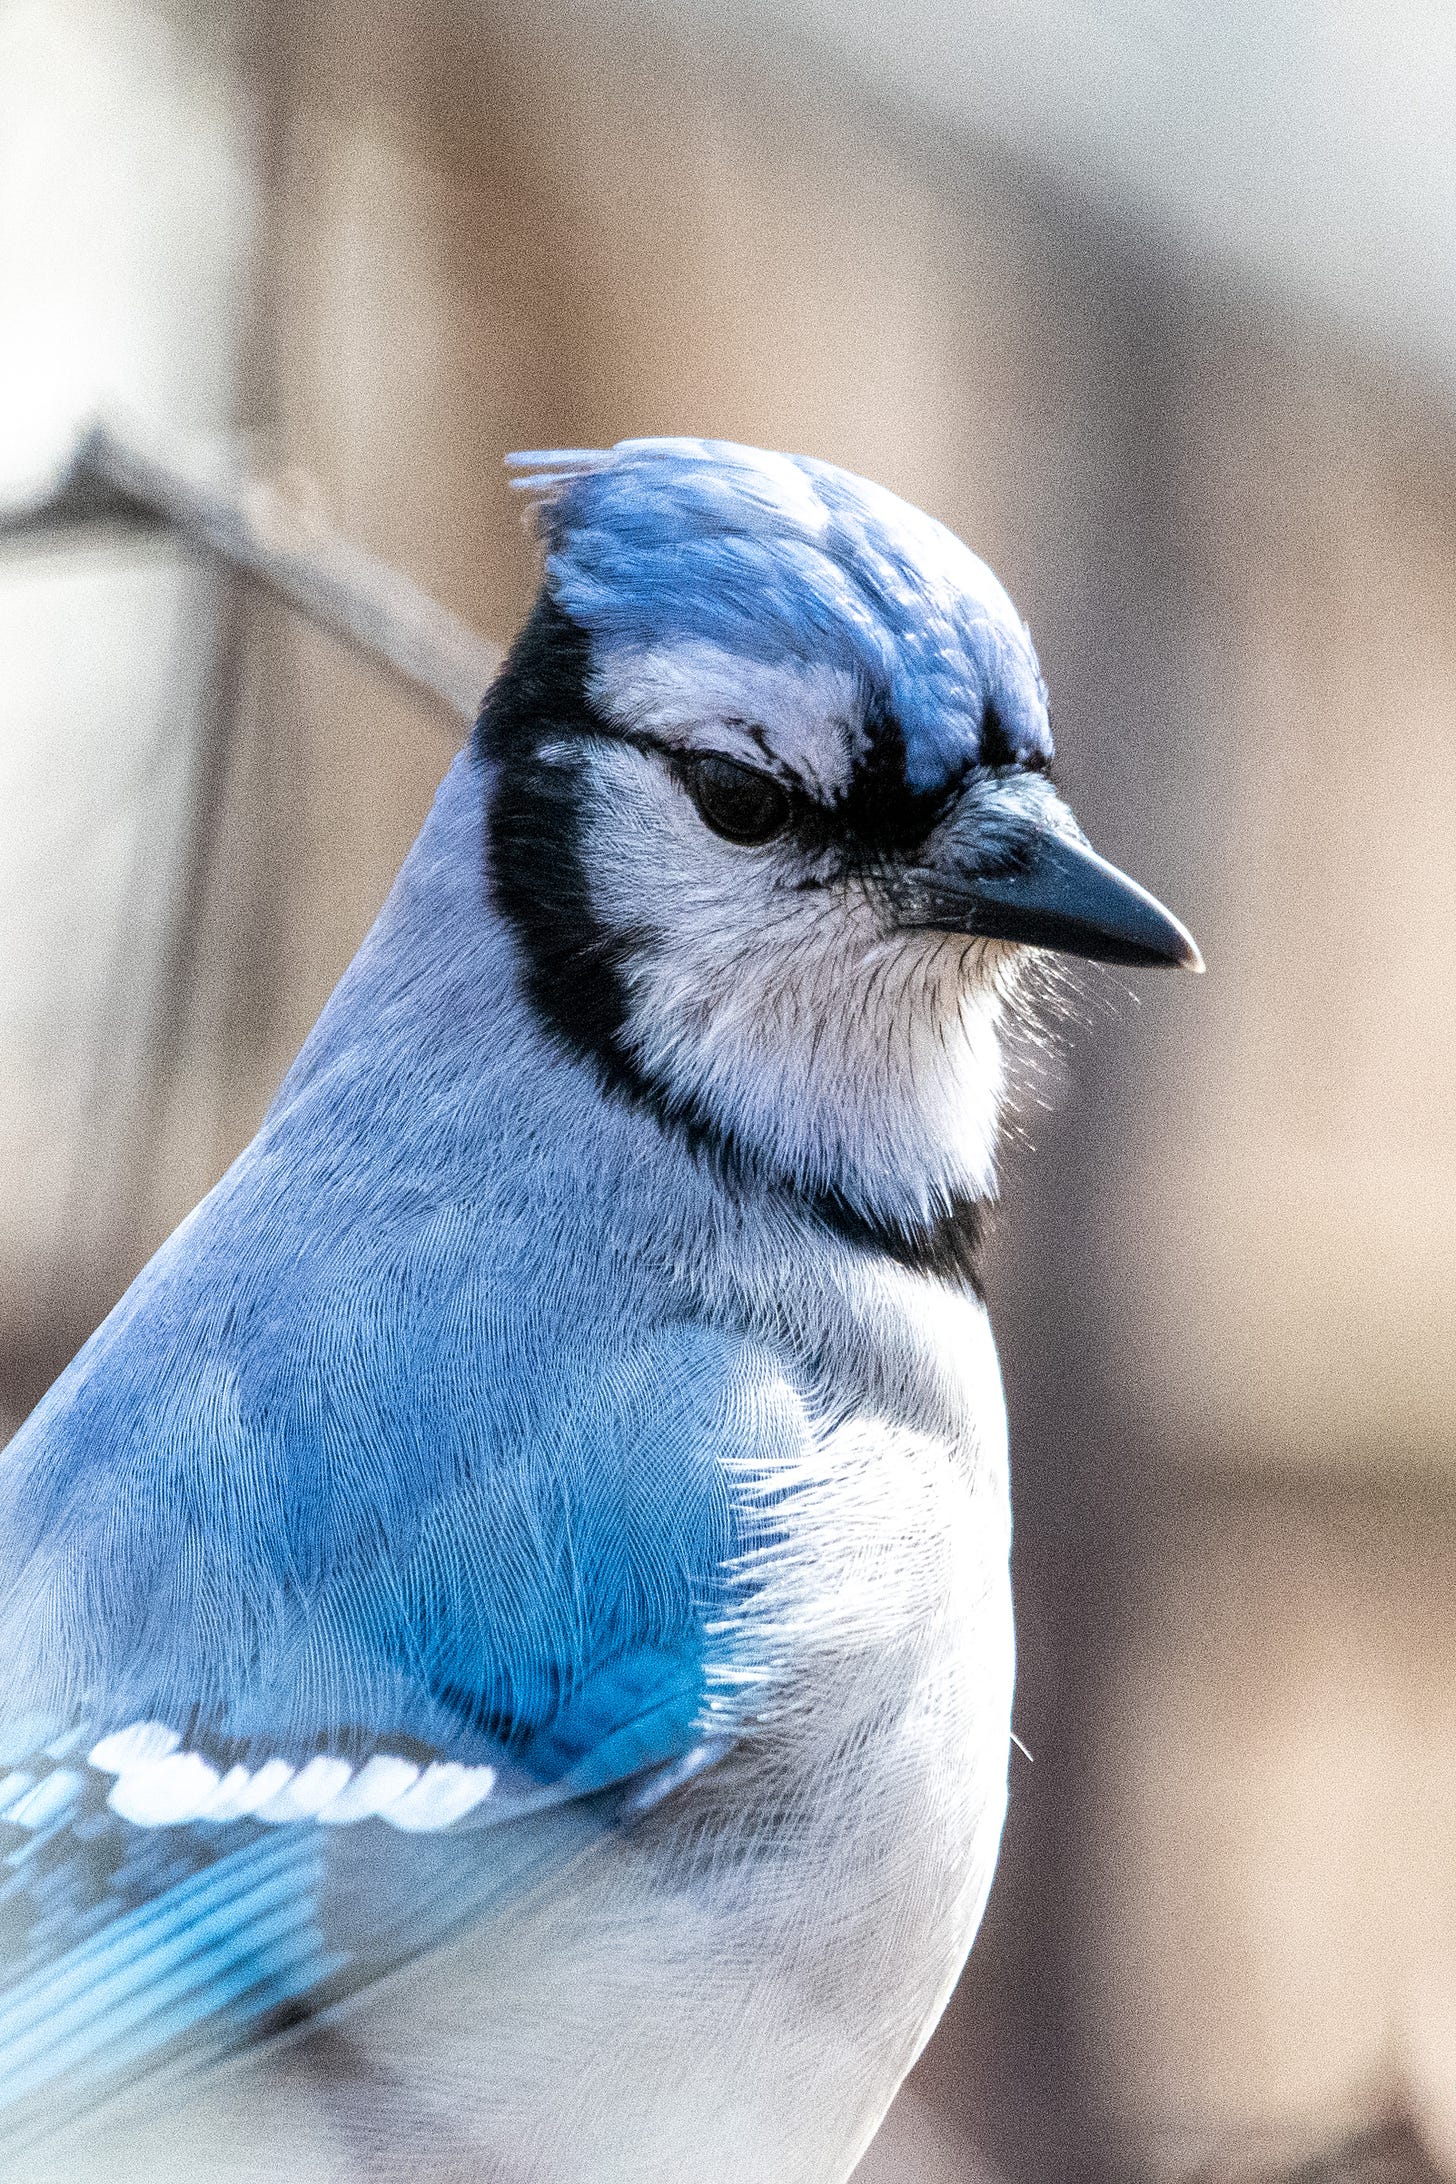 Close-up of head and torso of a blue jay, eyes cast down